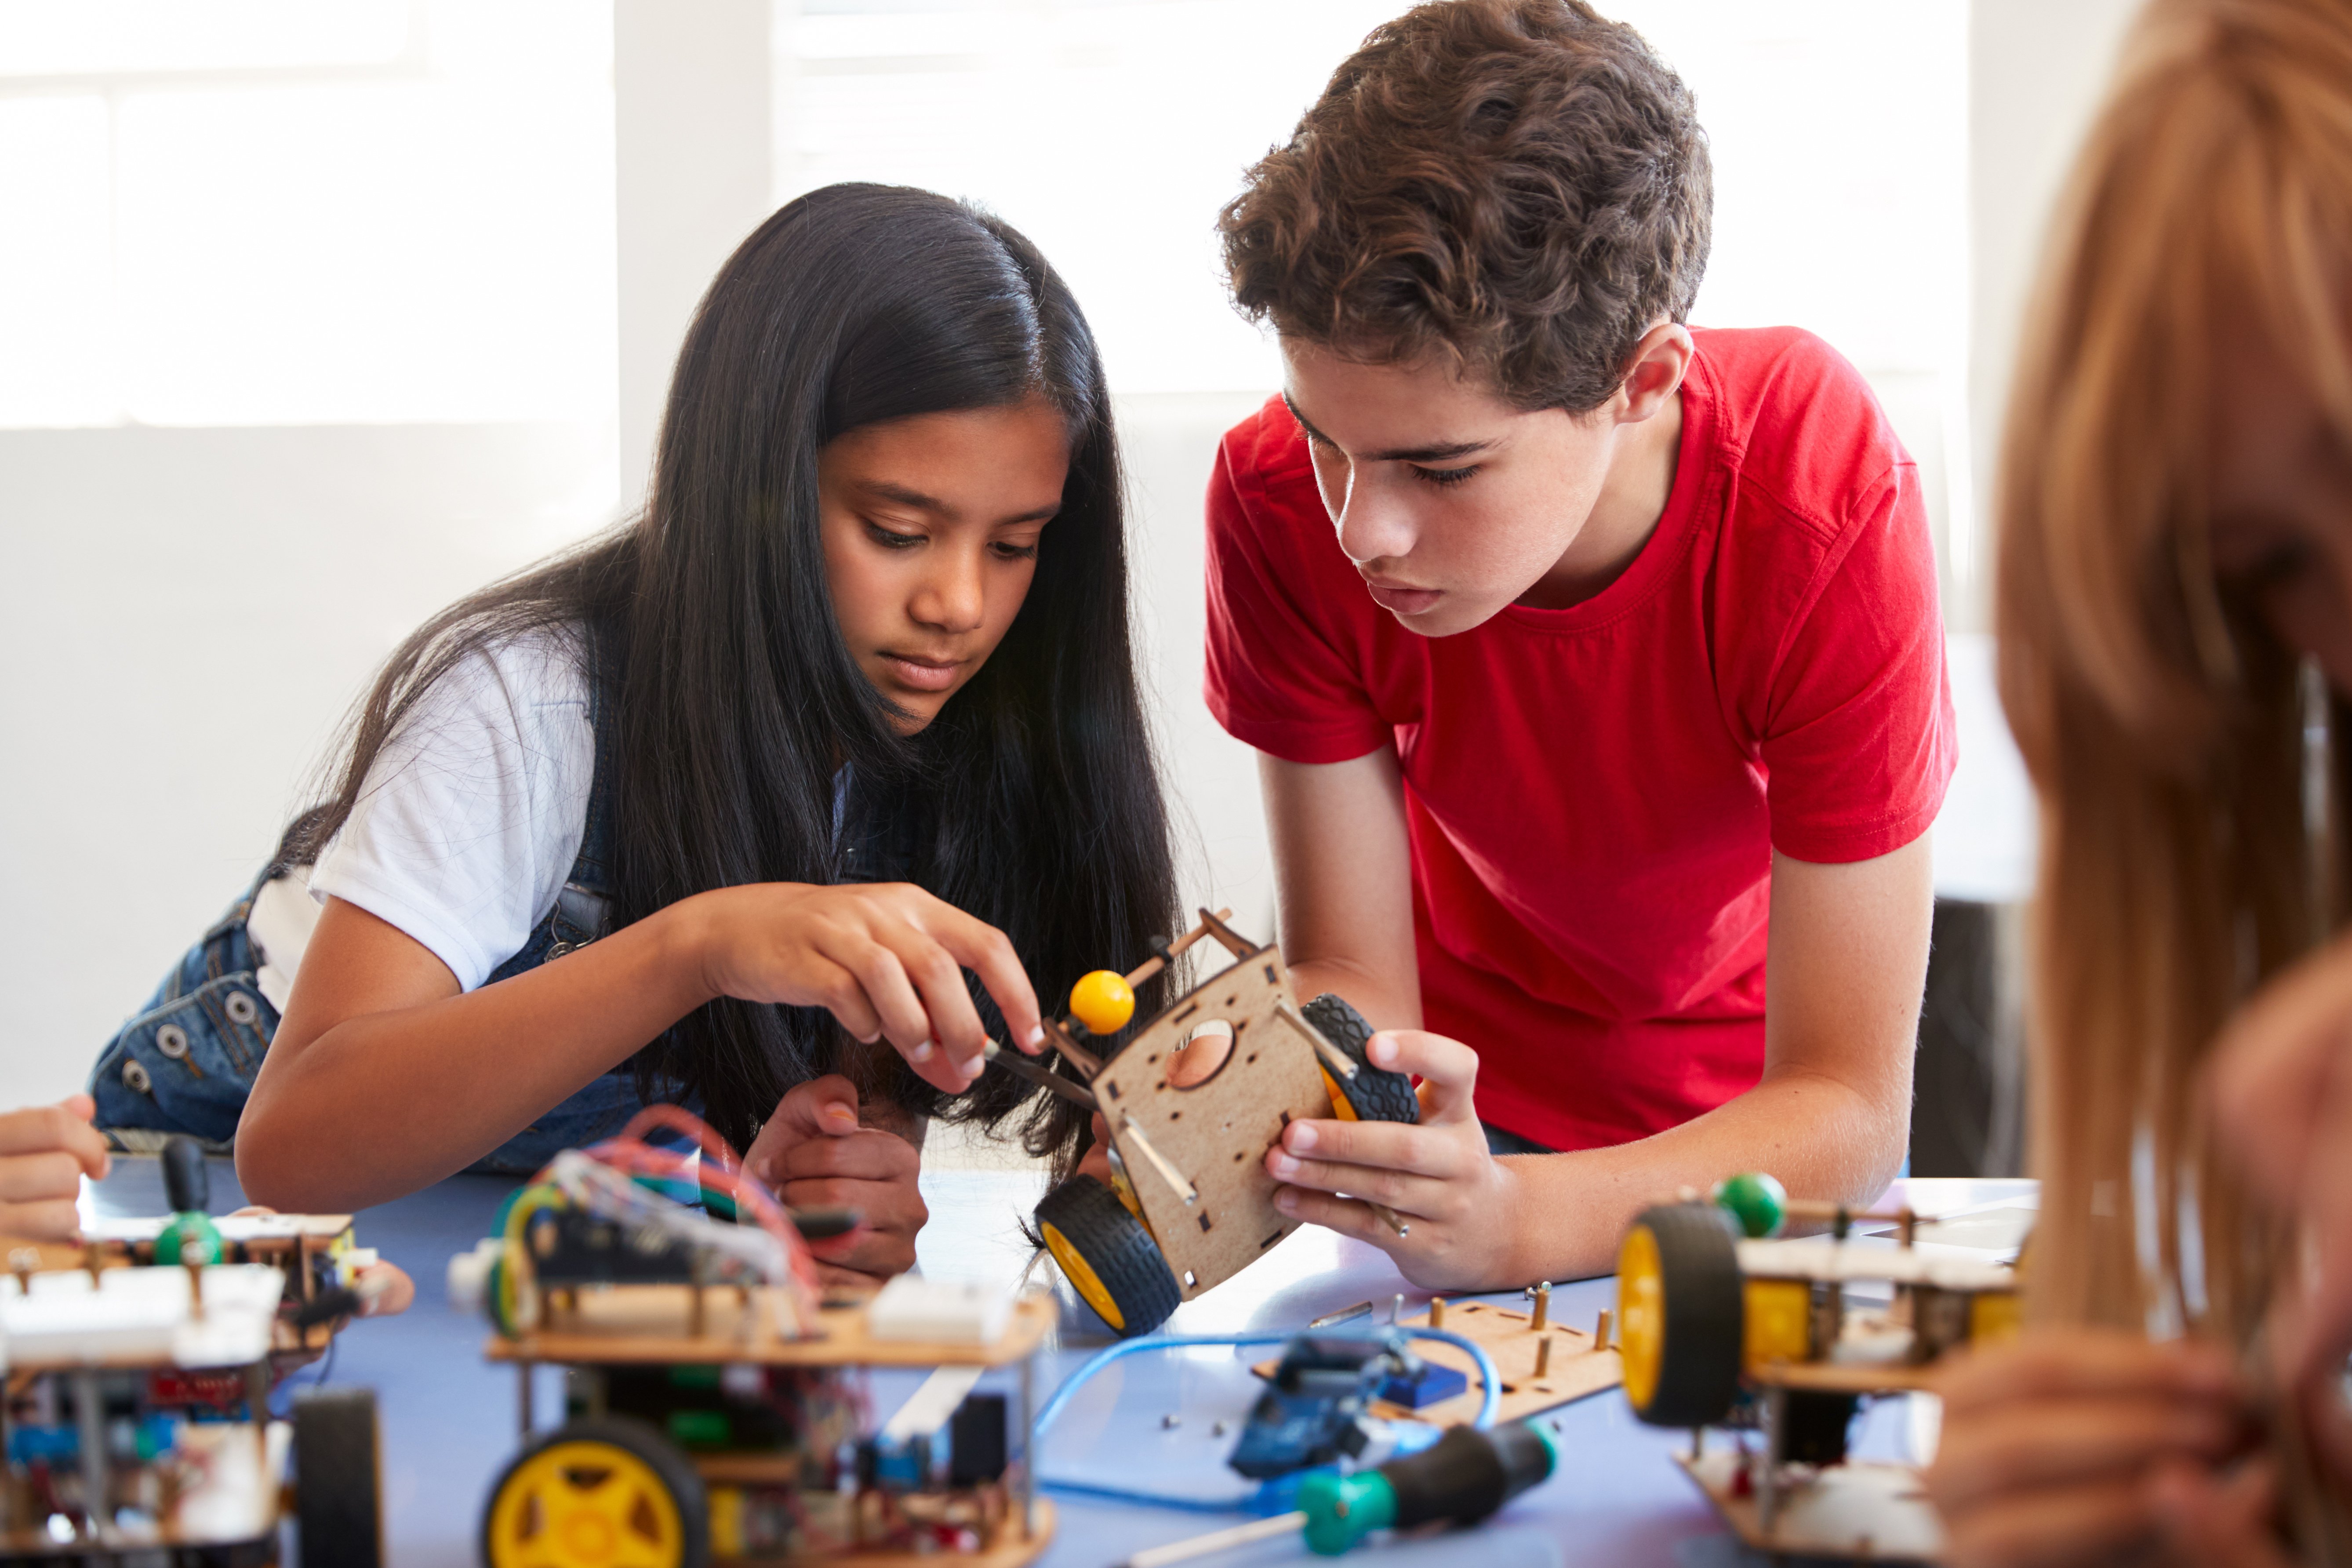 Teach Engineering: Engineering projects for kids